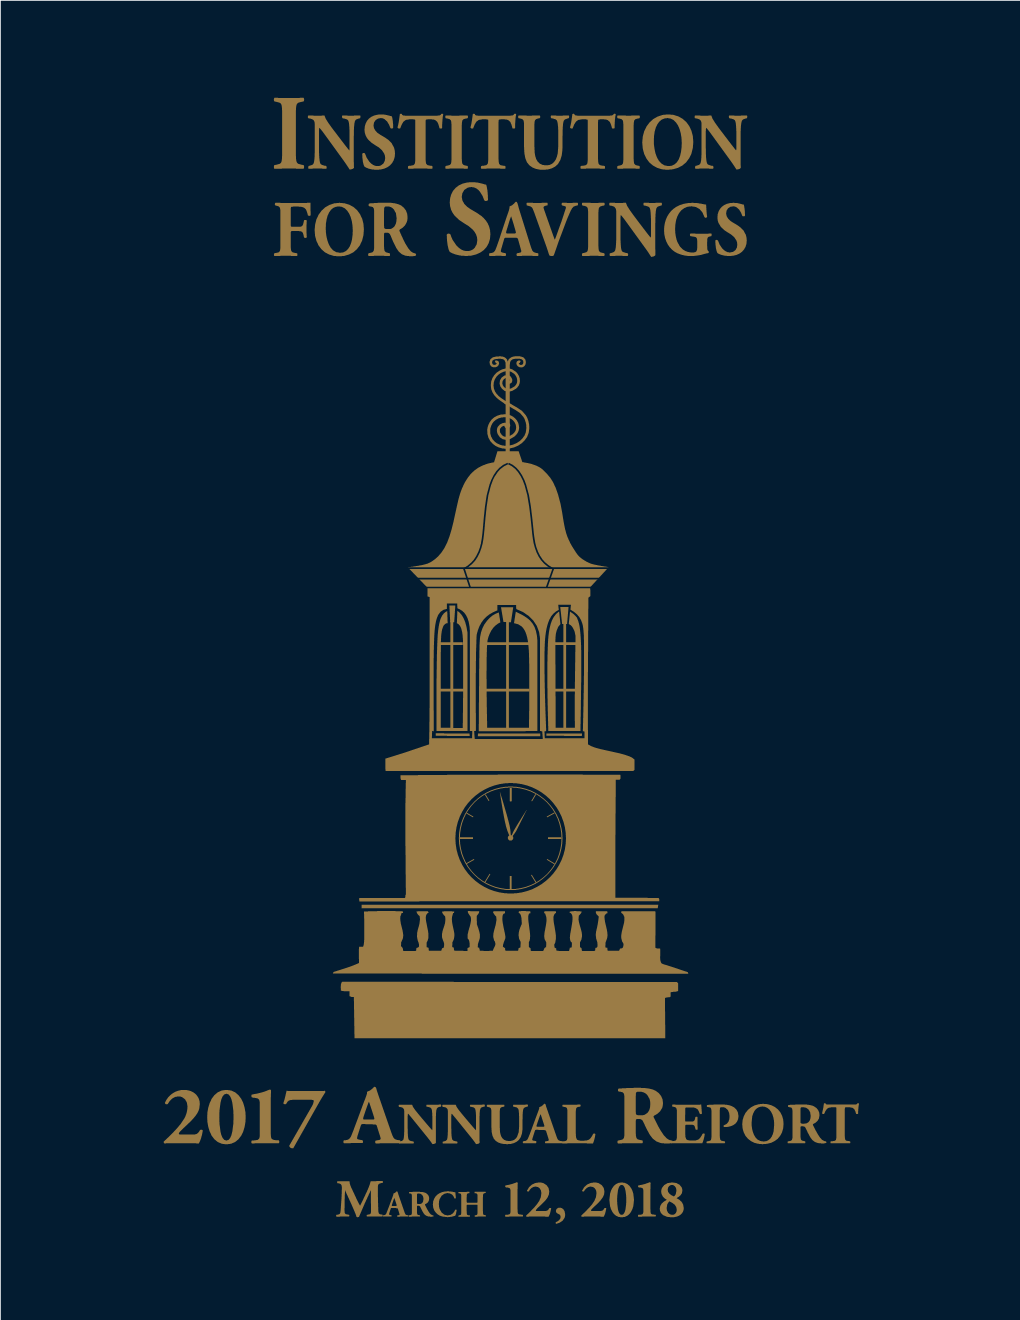 Institution for Savings 2017 Annual Report